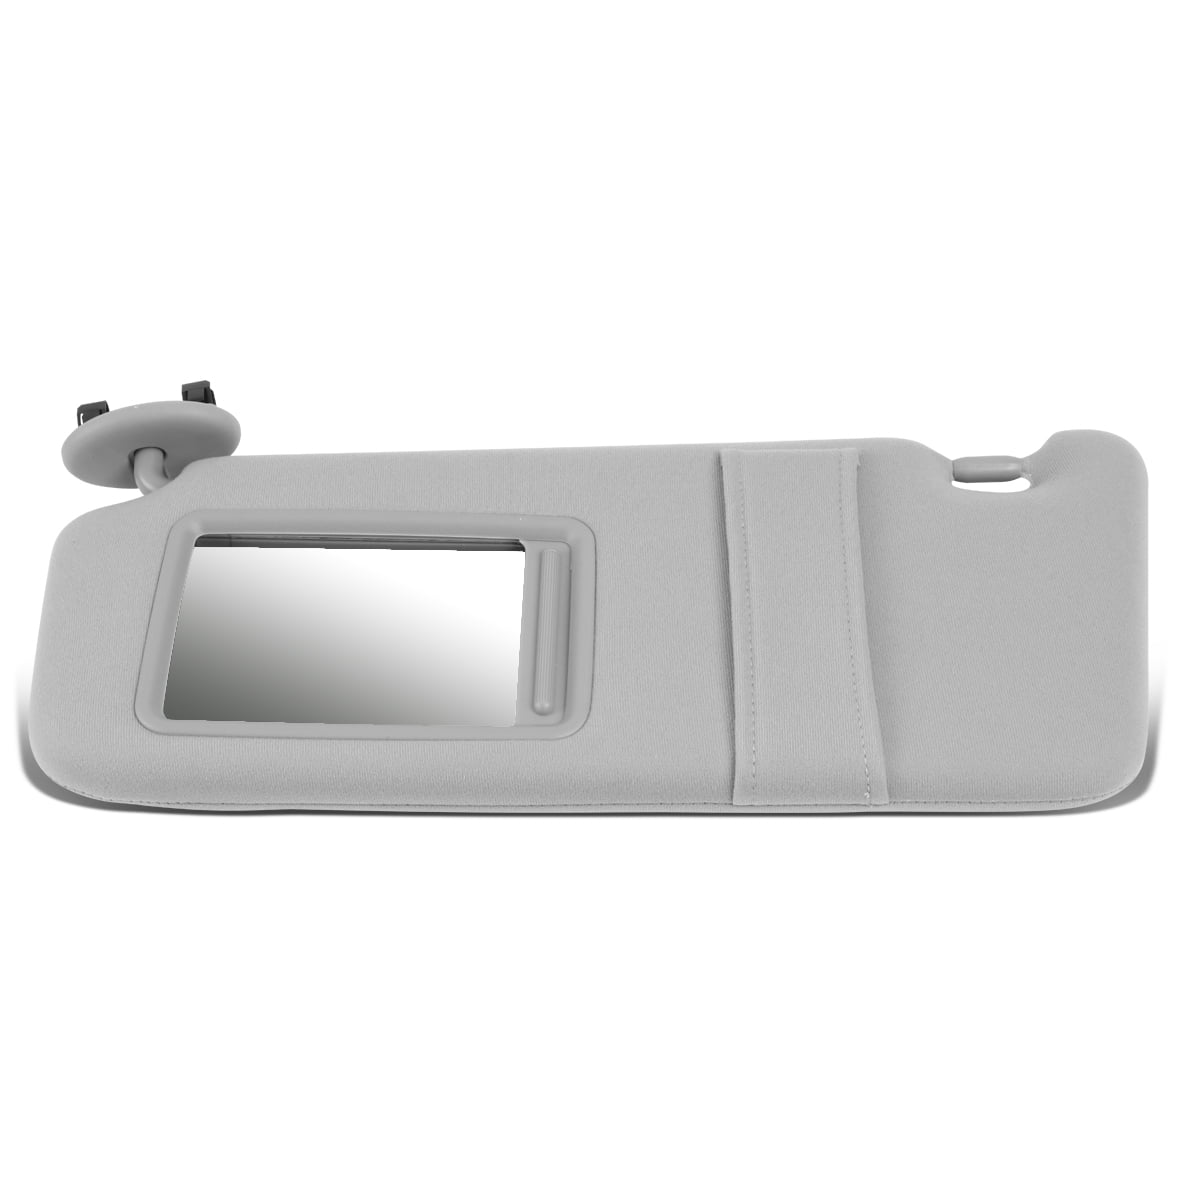 toyota camry sun visor replacement cost